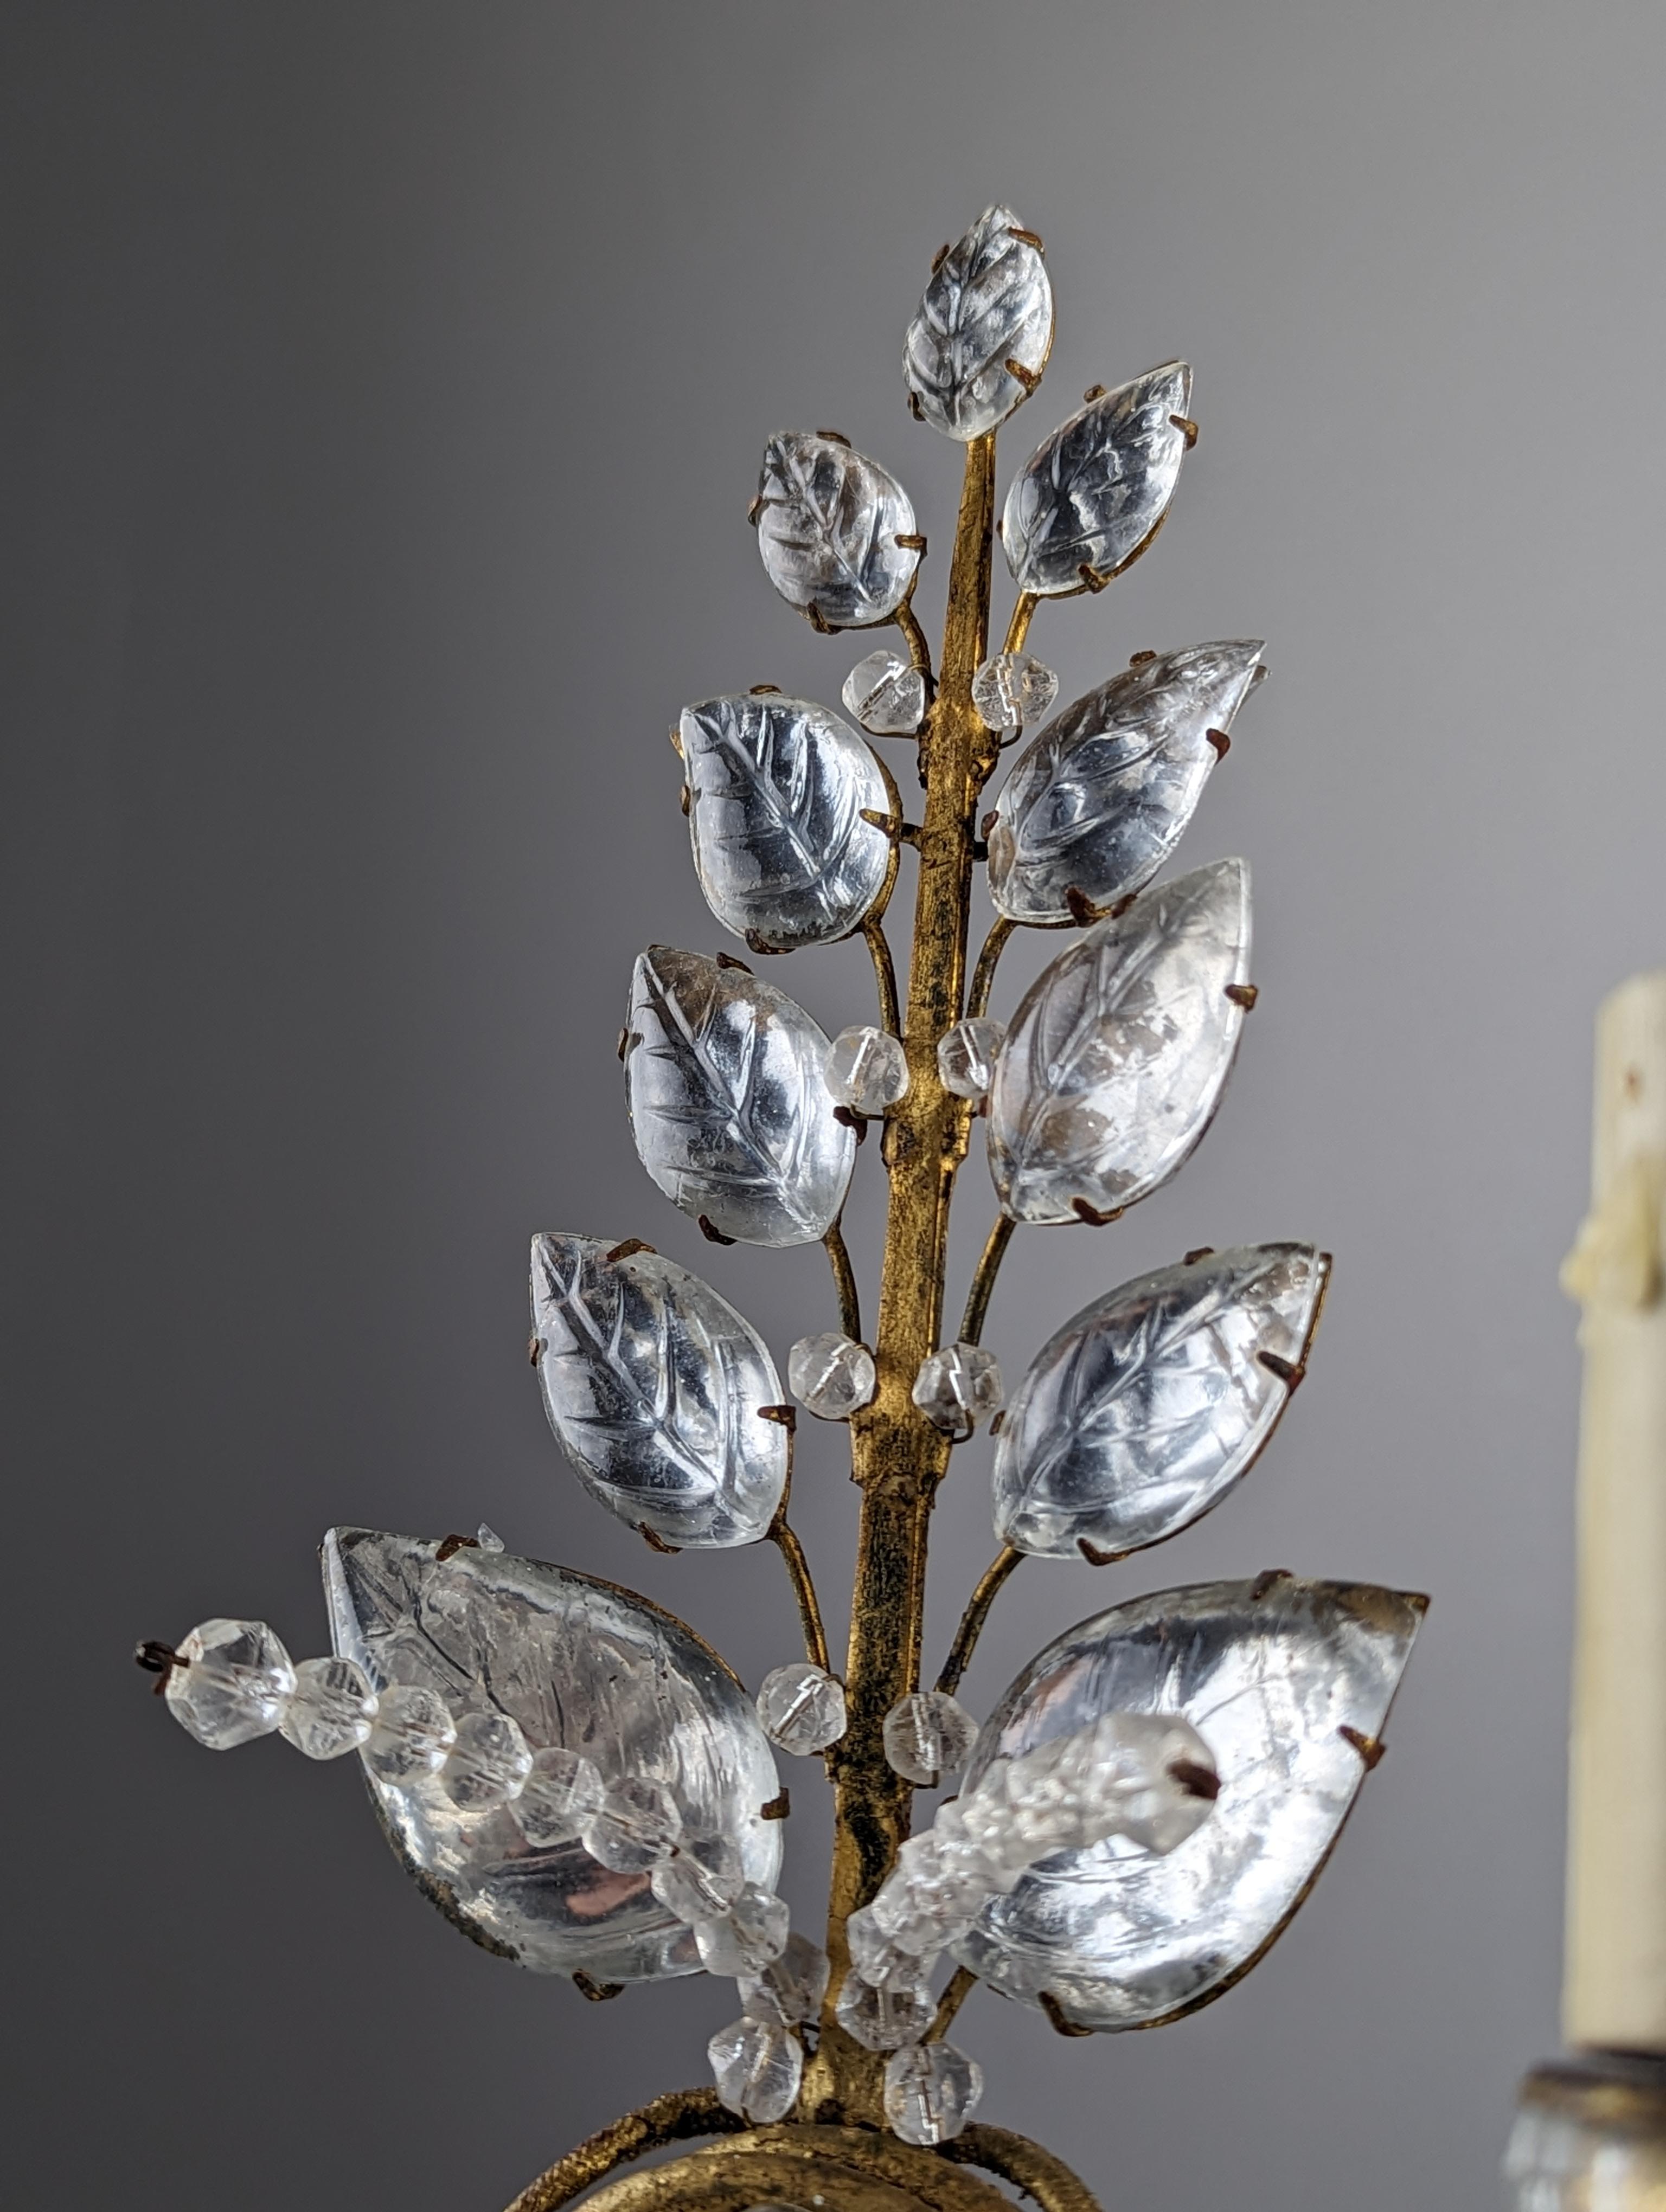 Beautiful set of three sconces attributed to Maison Baguès, produced in Paris, France at the beginning of the century showing the quality and craftsmanship of the prestigious French house. The crystal leaves delicately set in gold metal, two spikes